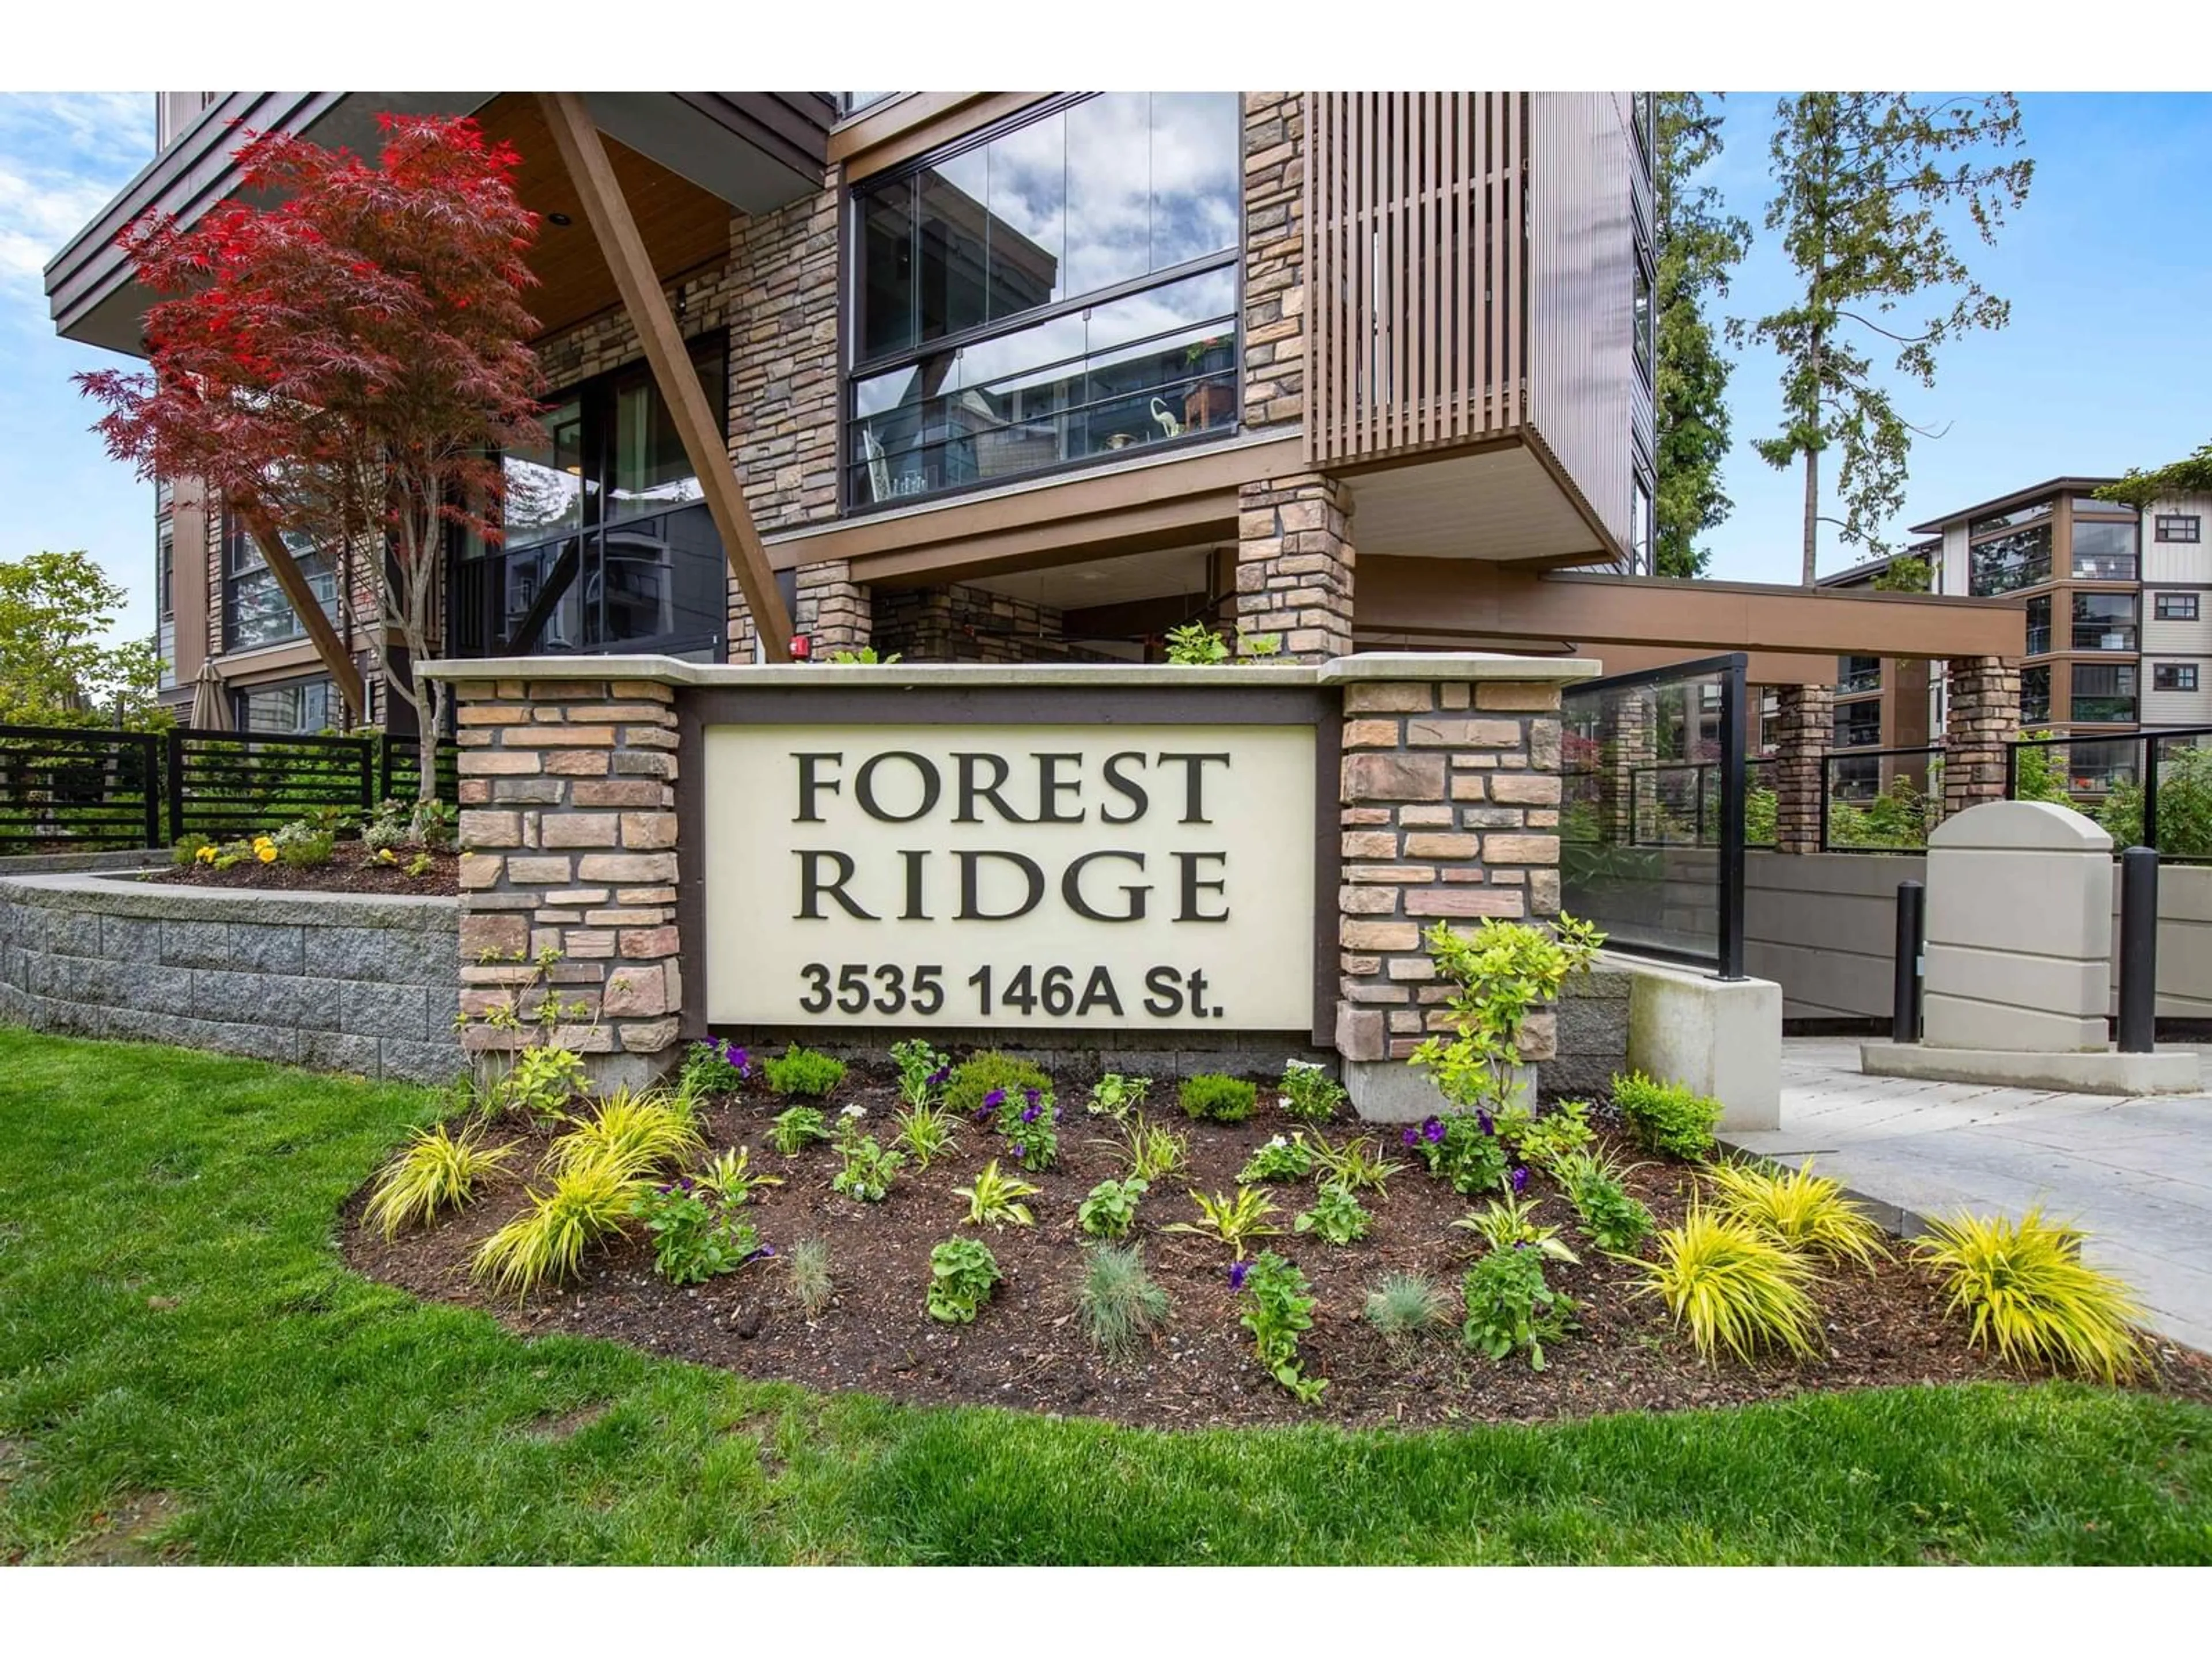 Forest view for 507 3535 146A STREET, Surrey British Columbia V4P0H2